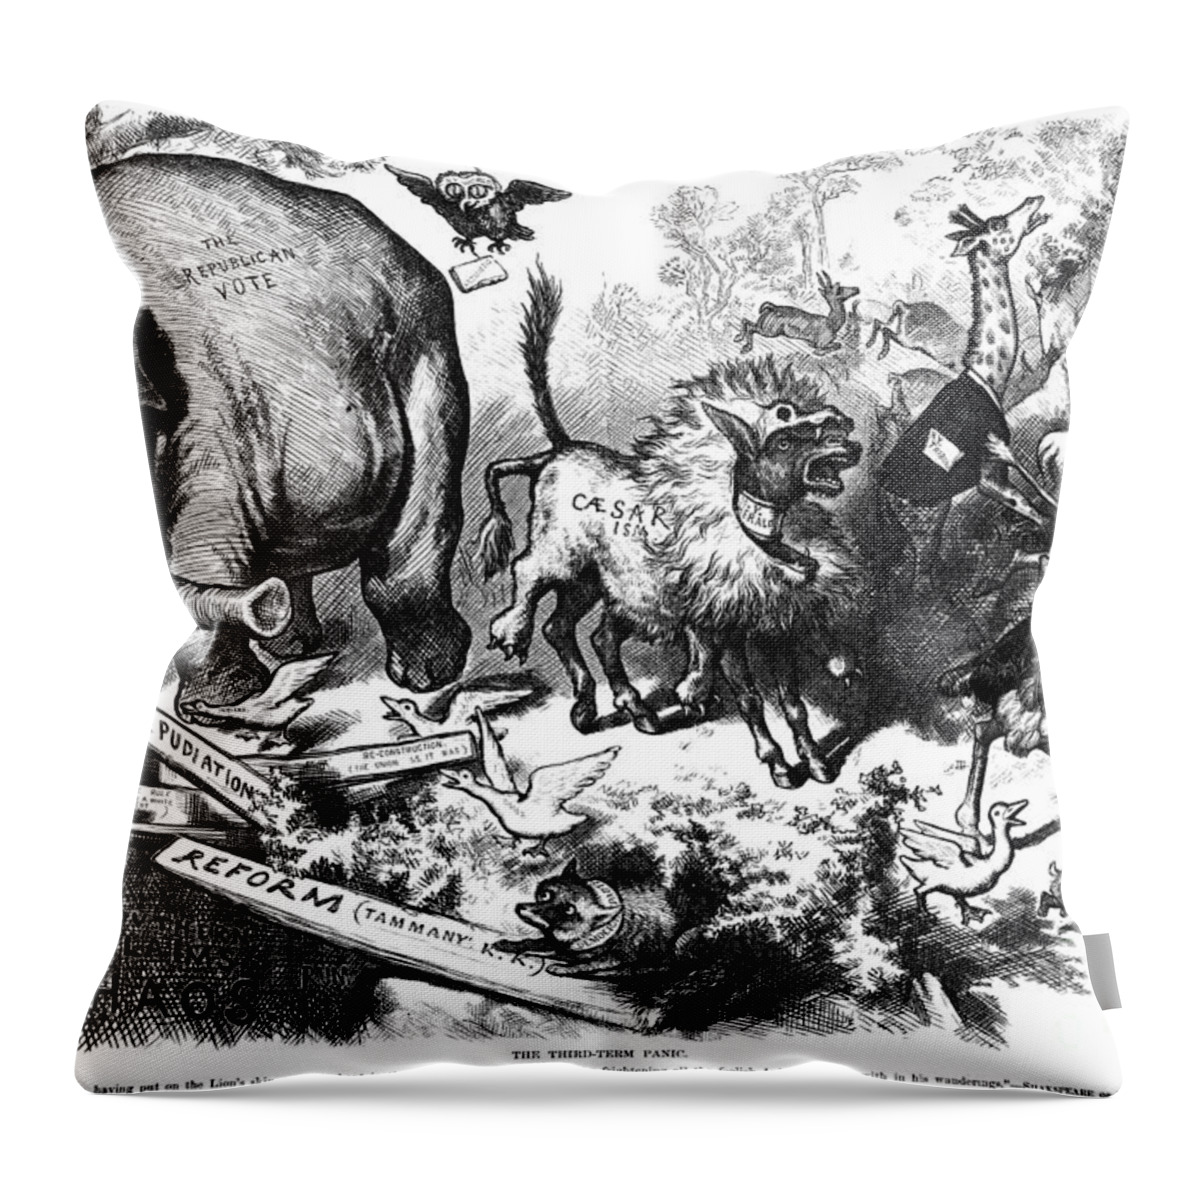 1874 Throw Pillow featuring the photograph Republican Elephant, 1874 by Granger